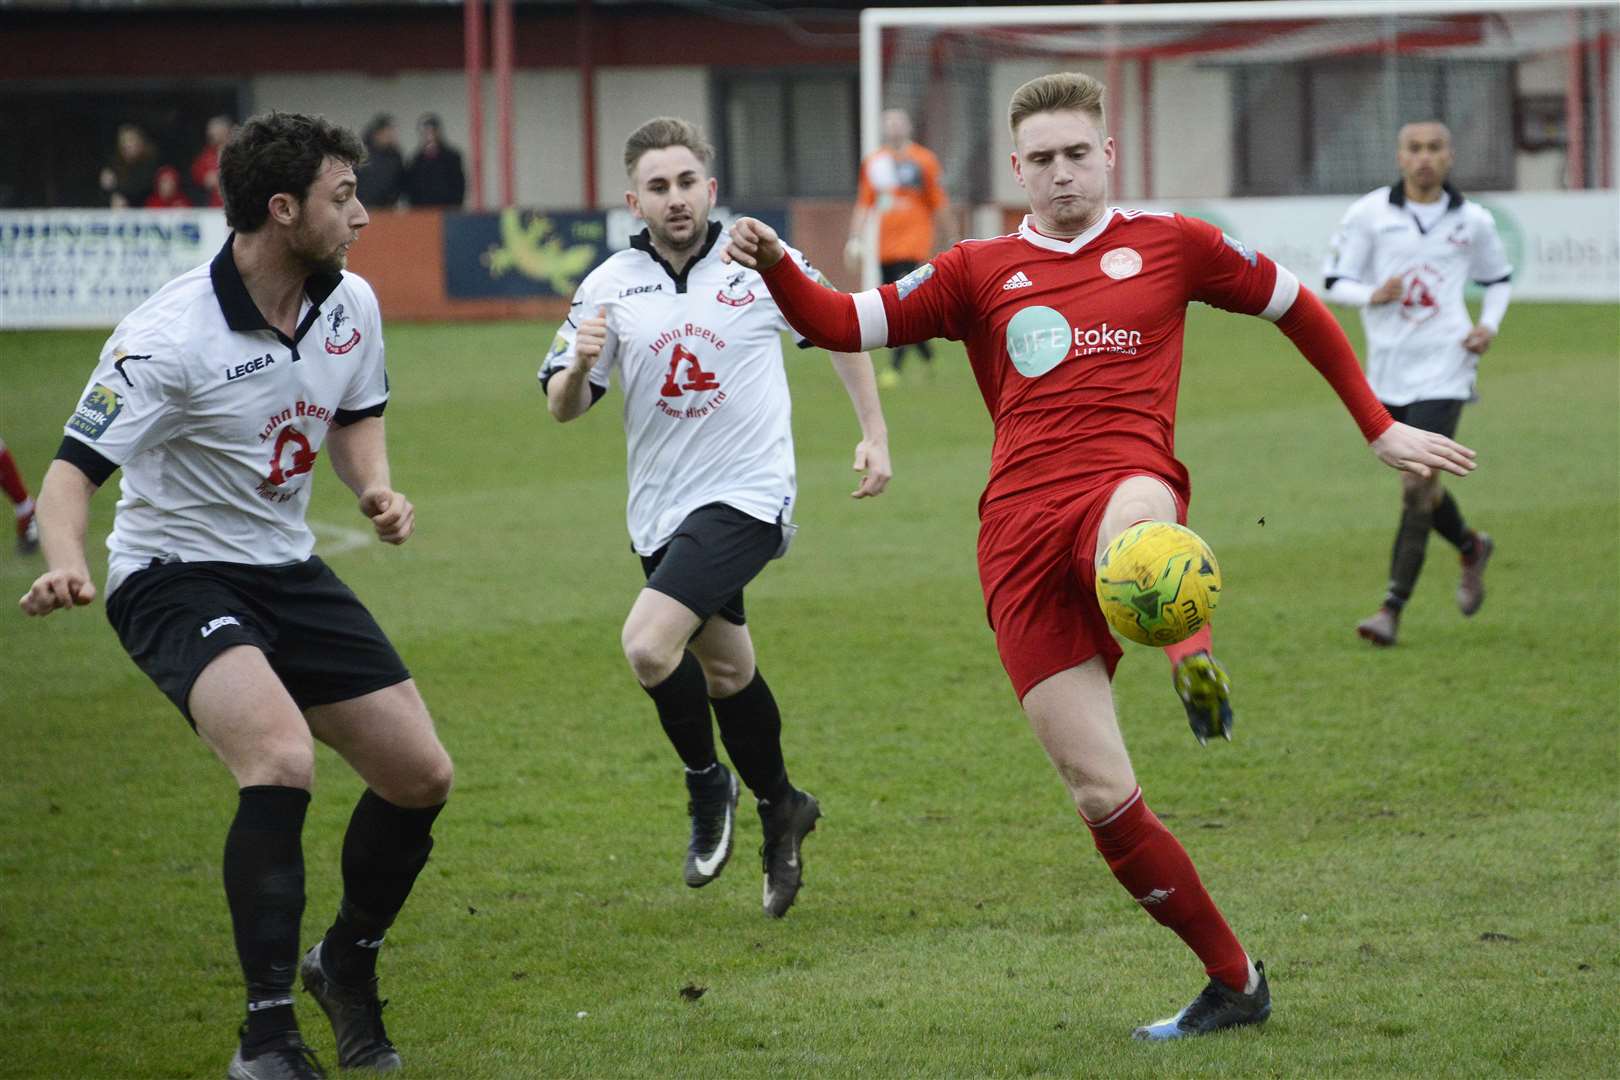 Mitchell Dickensen on the ball for Hythe against Ramsgate Picture: Paul Amos